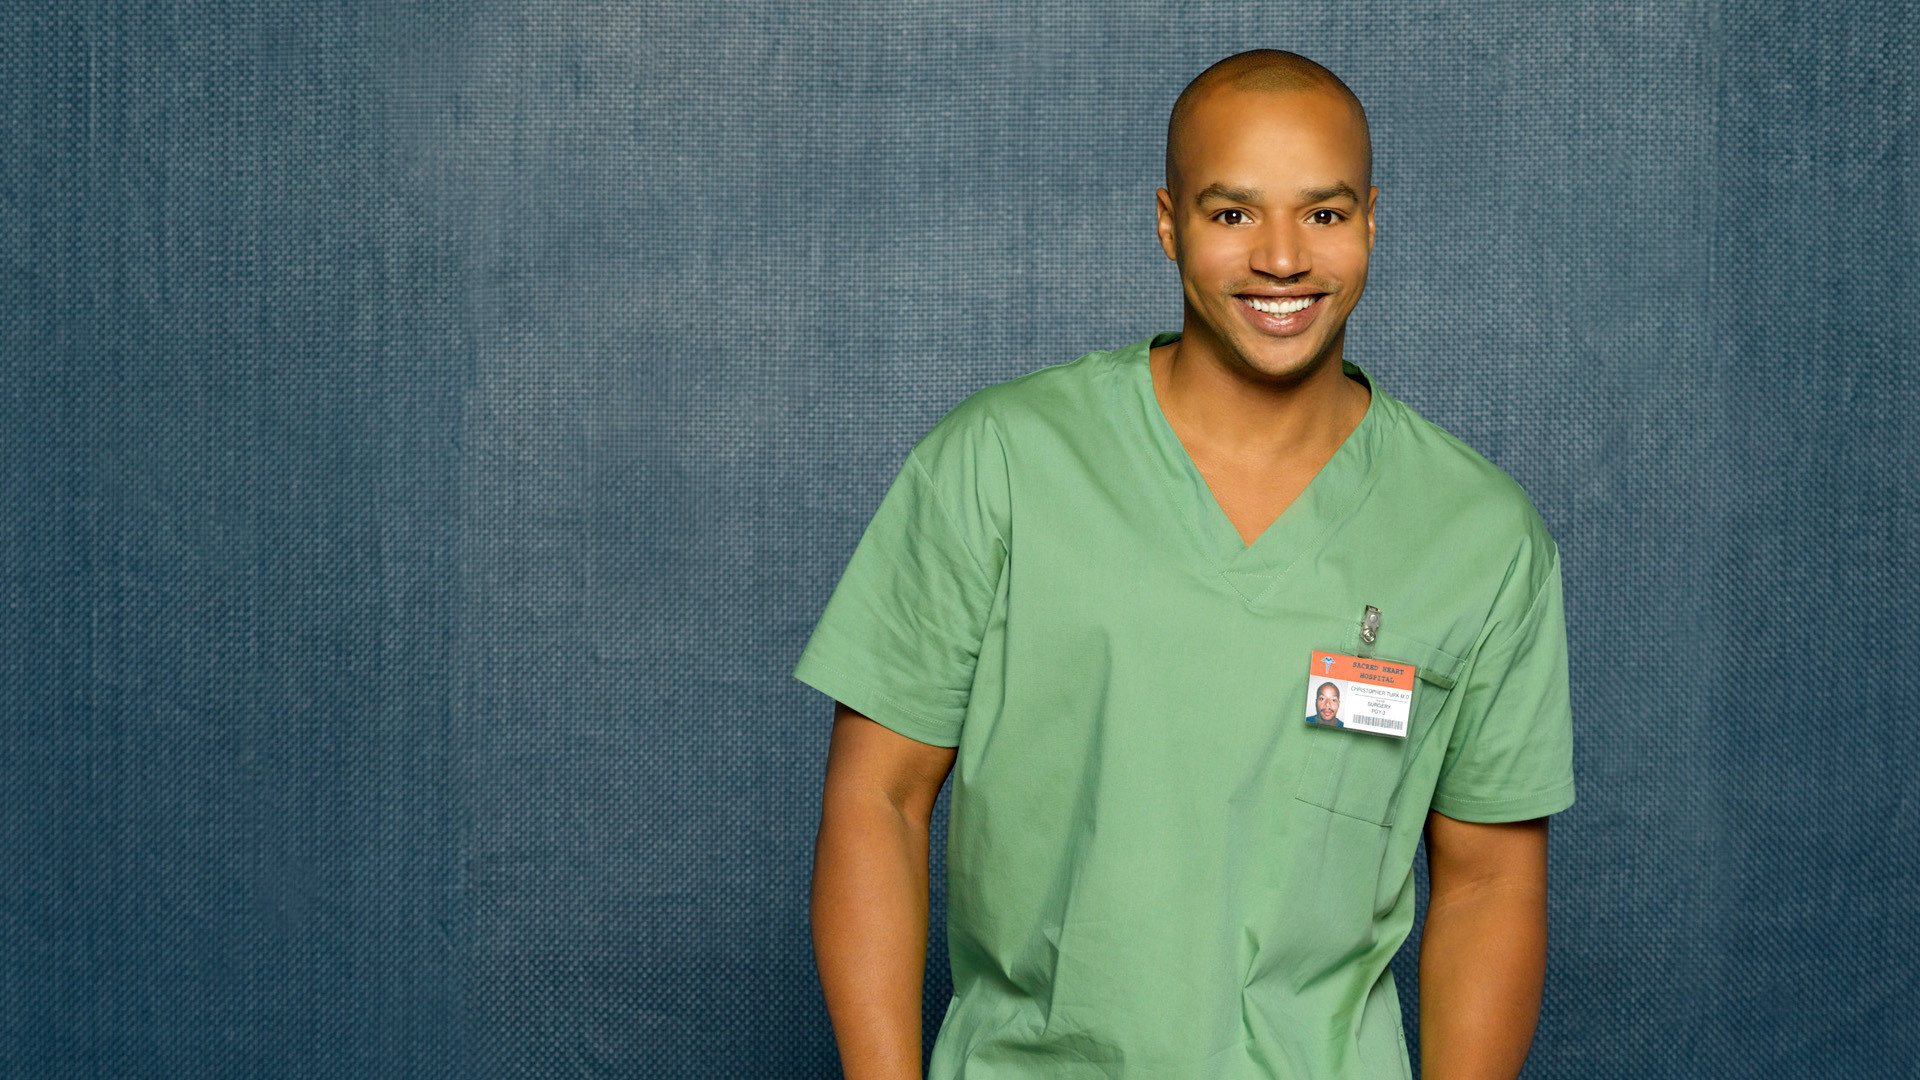 Donald Faison: Doctor Chris Turk, A former intern and the chief of surgery at the Sacred Heart Hospital. 1920x1080 Full HD Wallpaper.